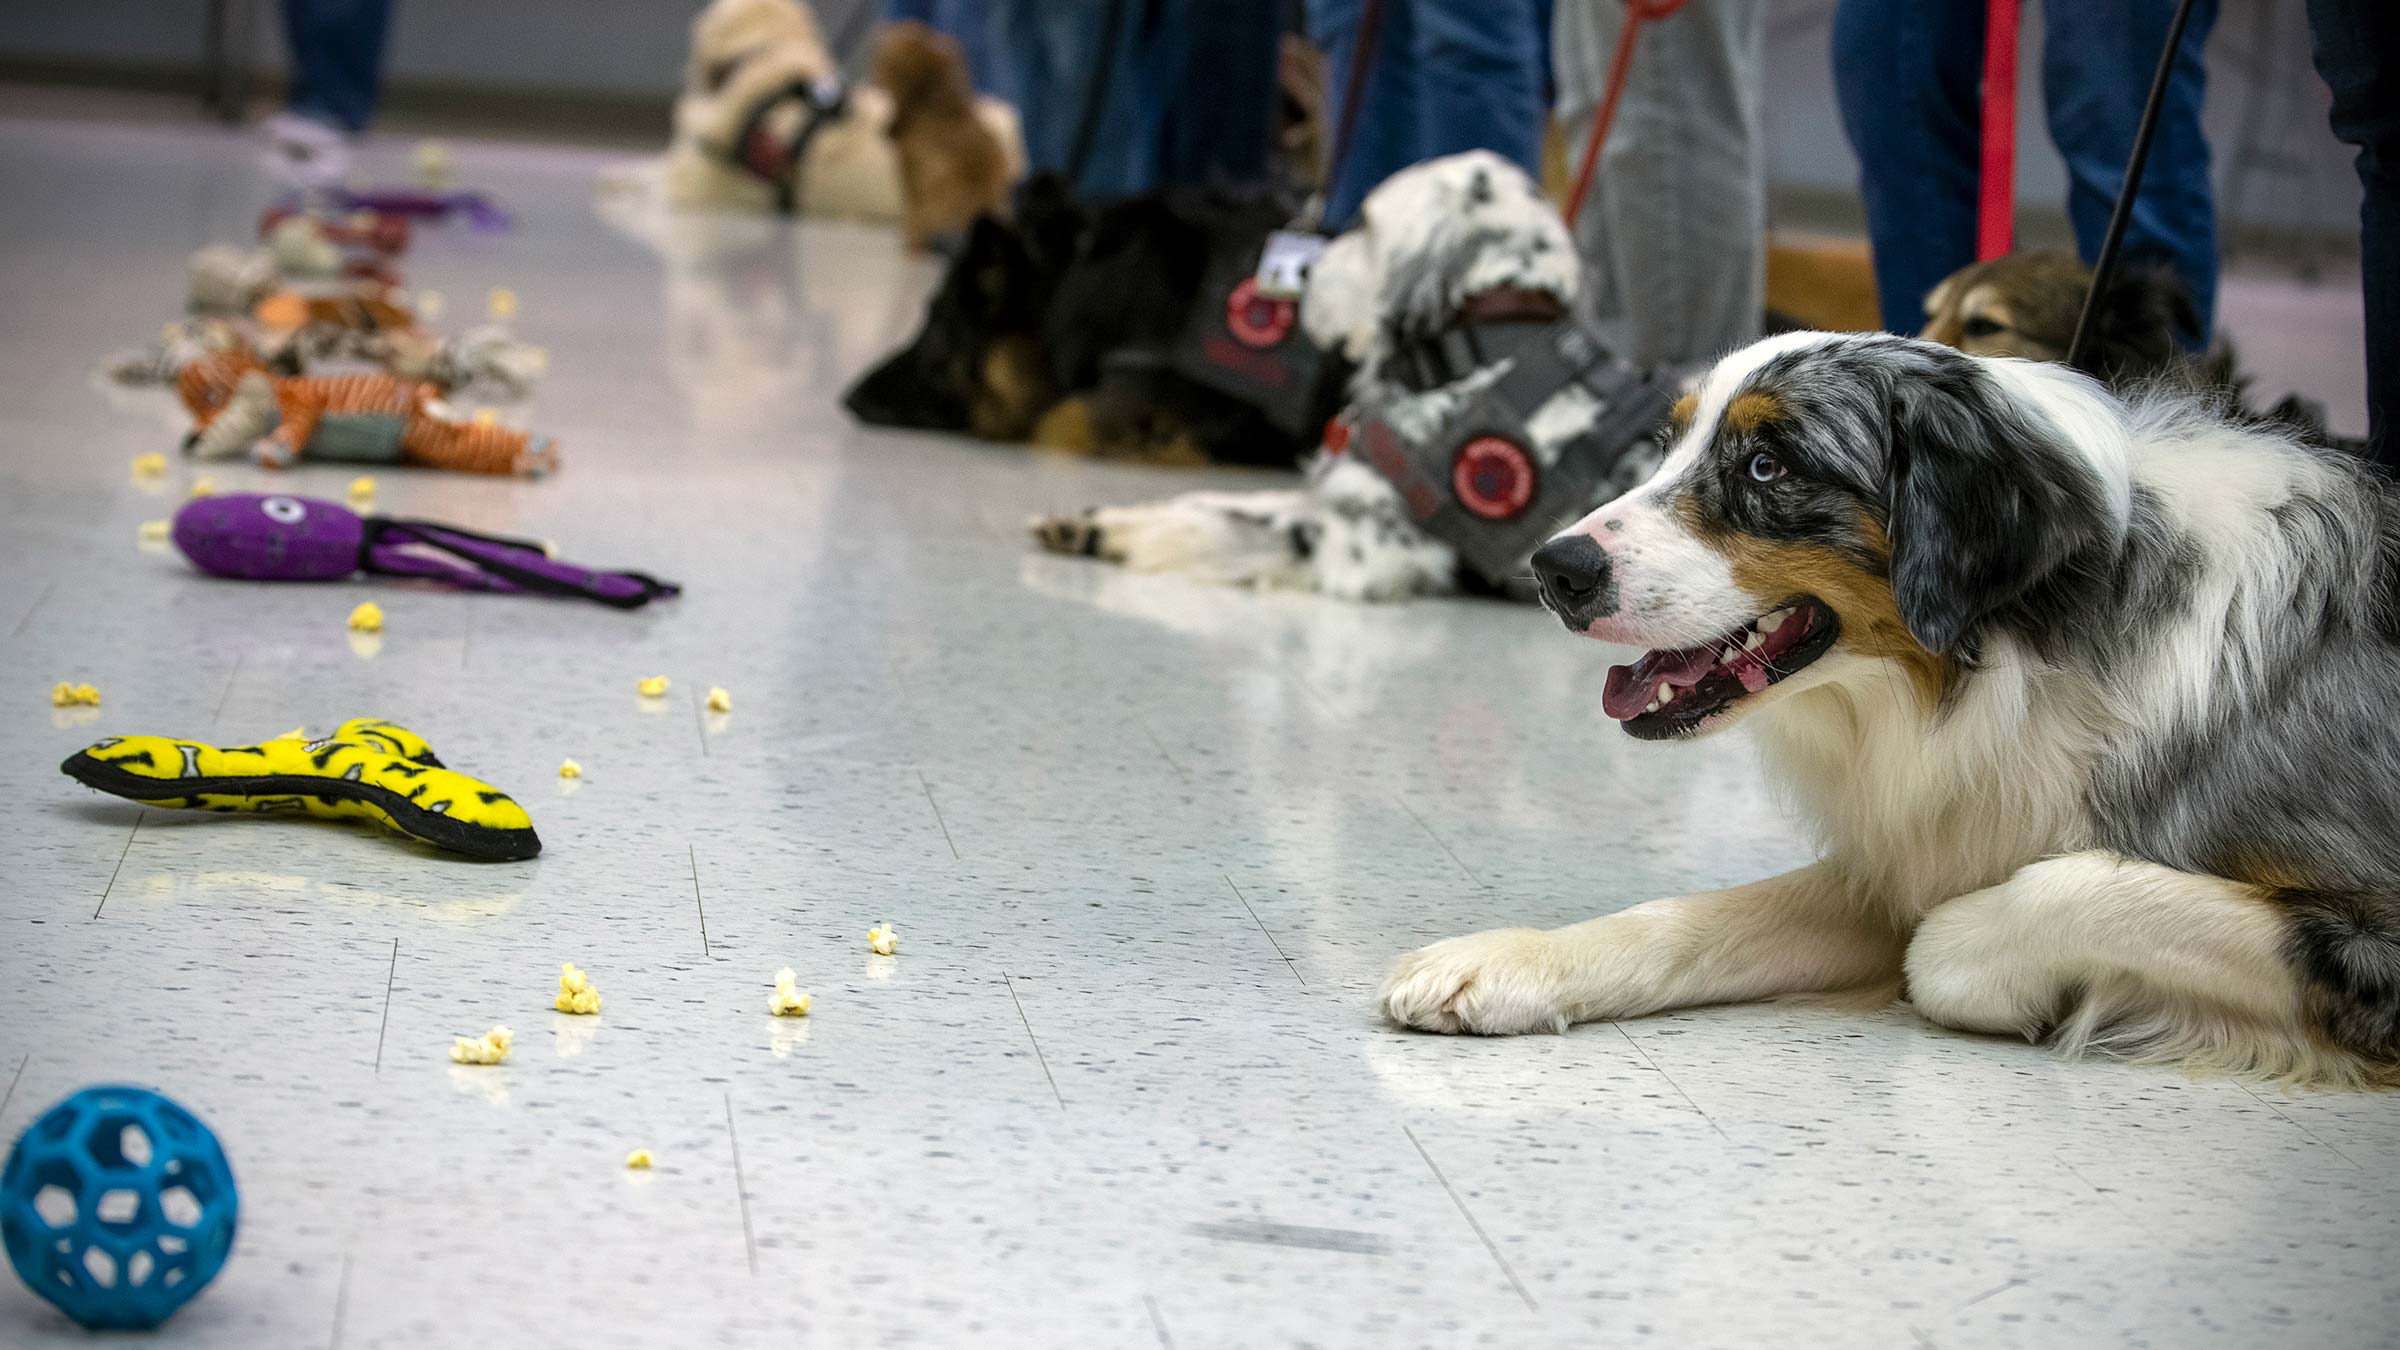 Buckeye Paws dogs in training with food and toys in front of them